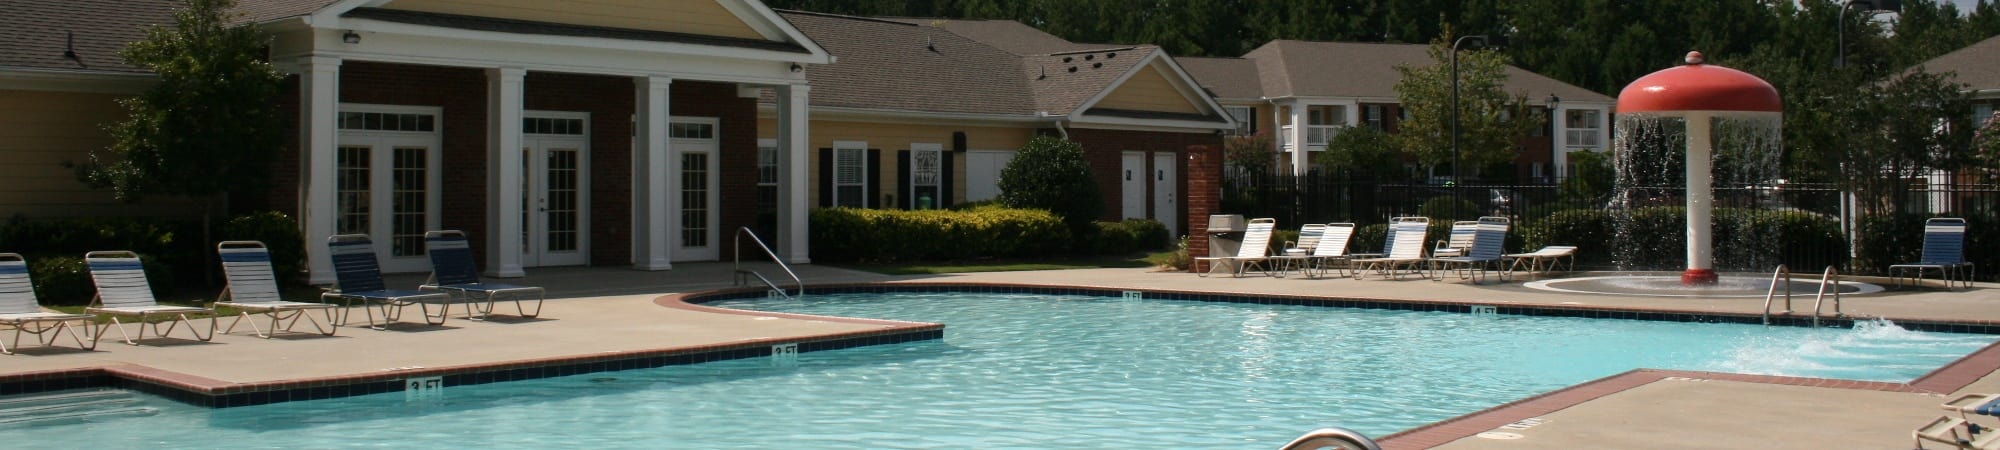 Affordable 1 2 3 Bedroom Apartments In Lawrenceville Ga